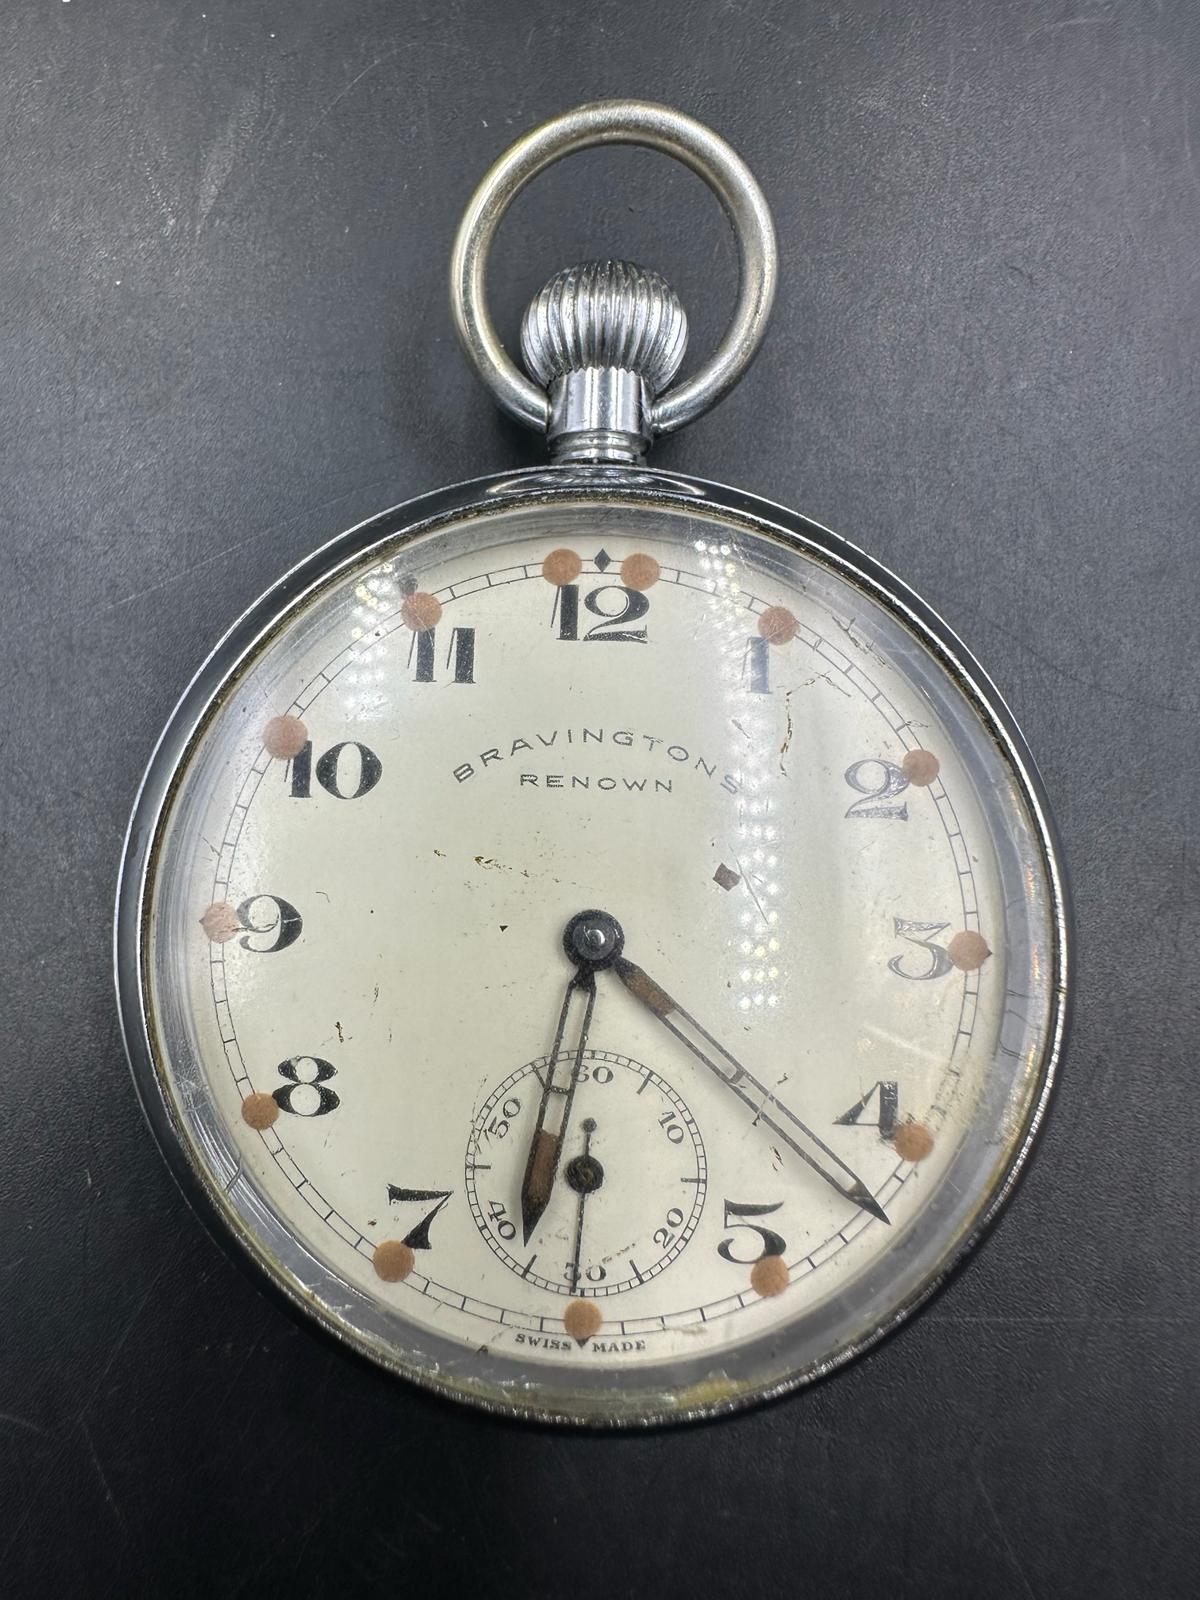 A vintage Bravingtons Renown pocket watch in a nickel chromium plated cess